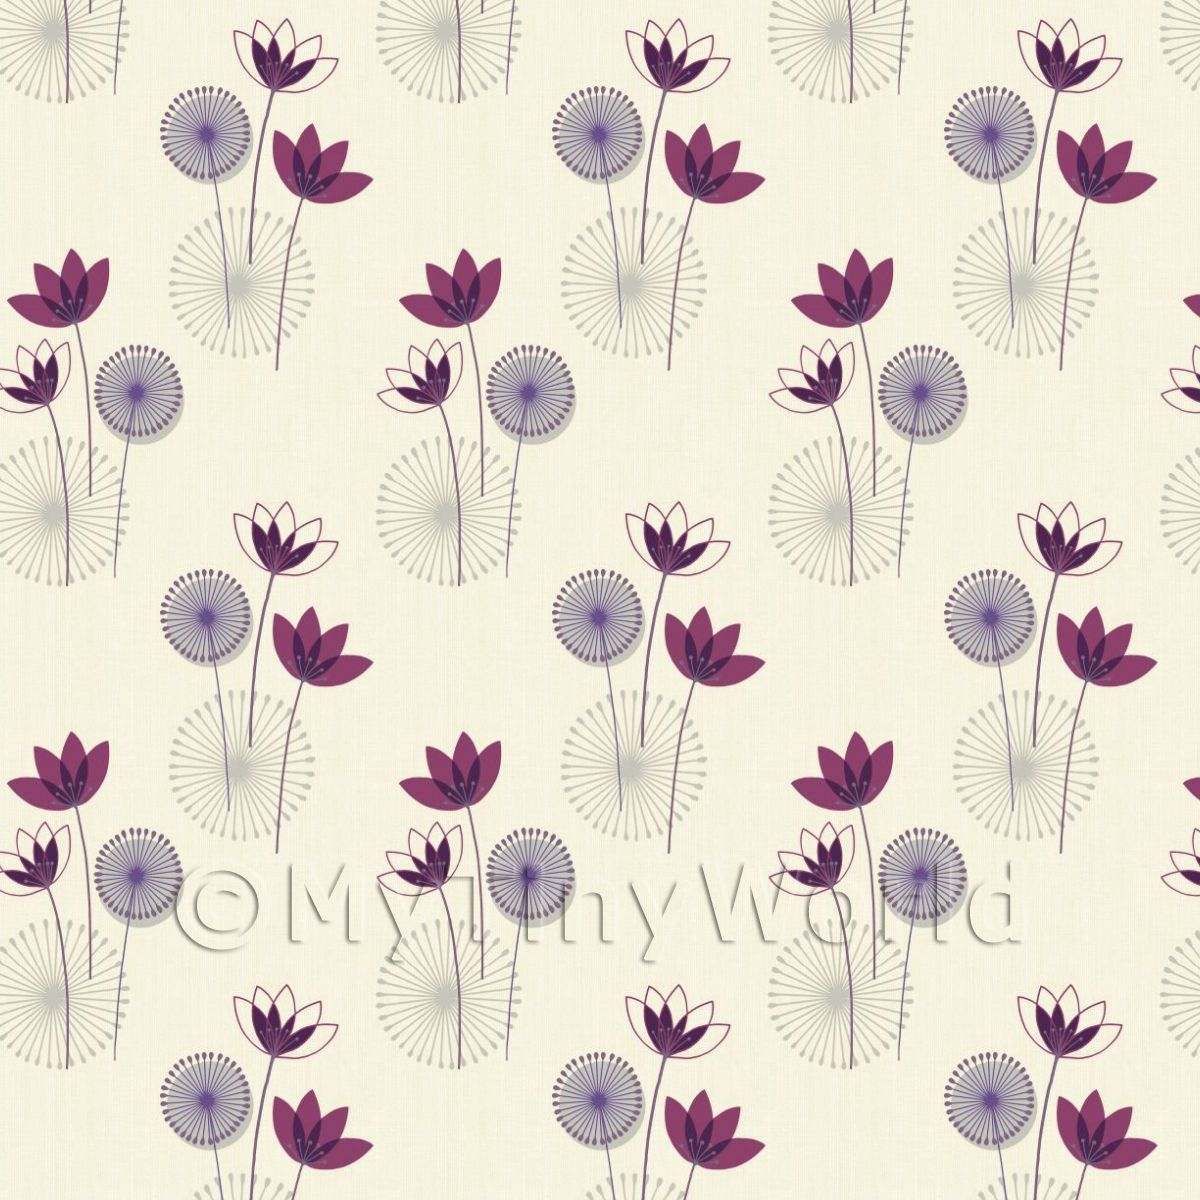 Dolls House Miniature Flowery Wallpaper Products